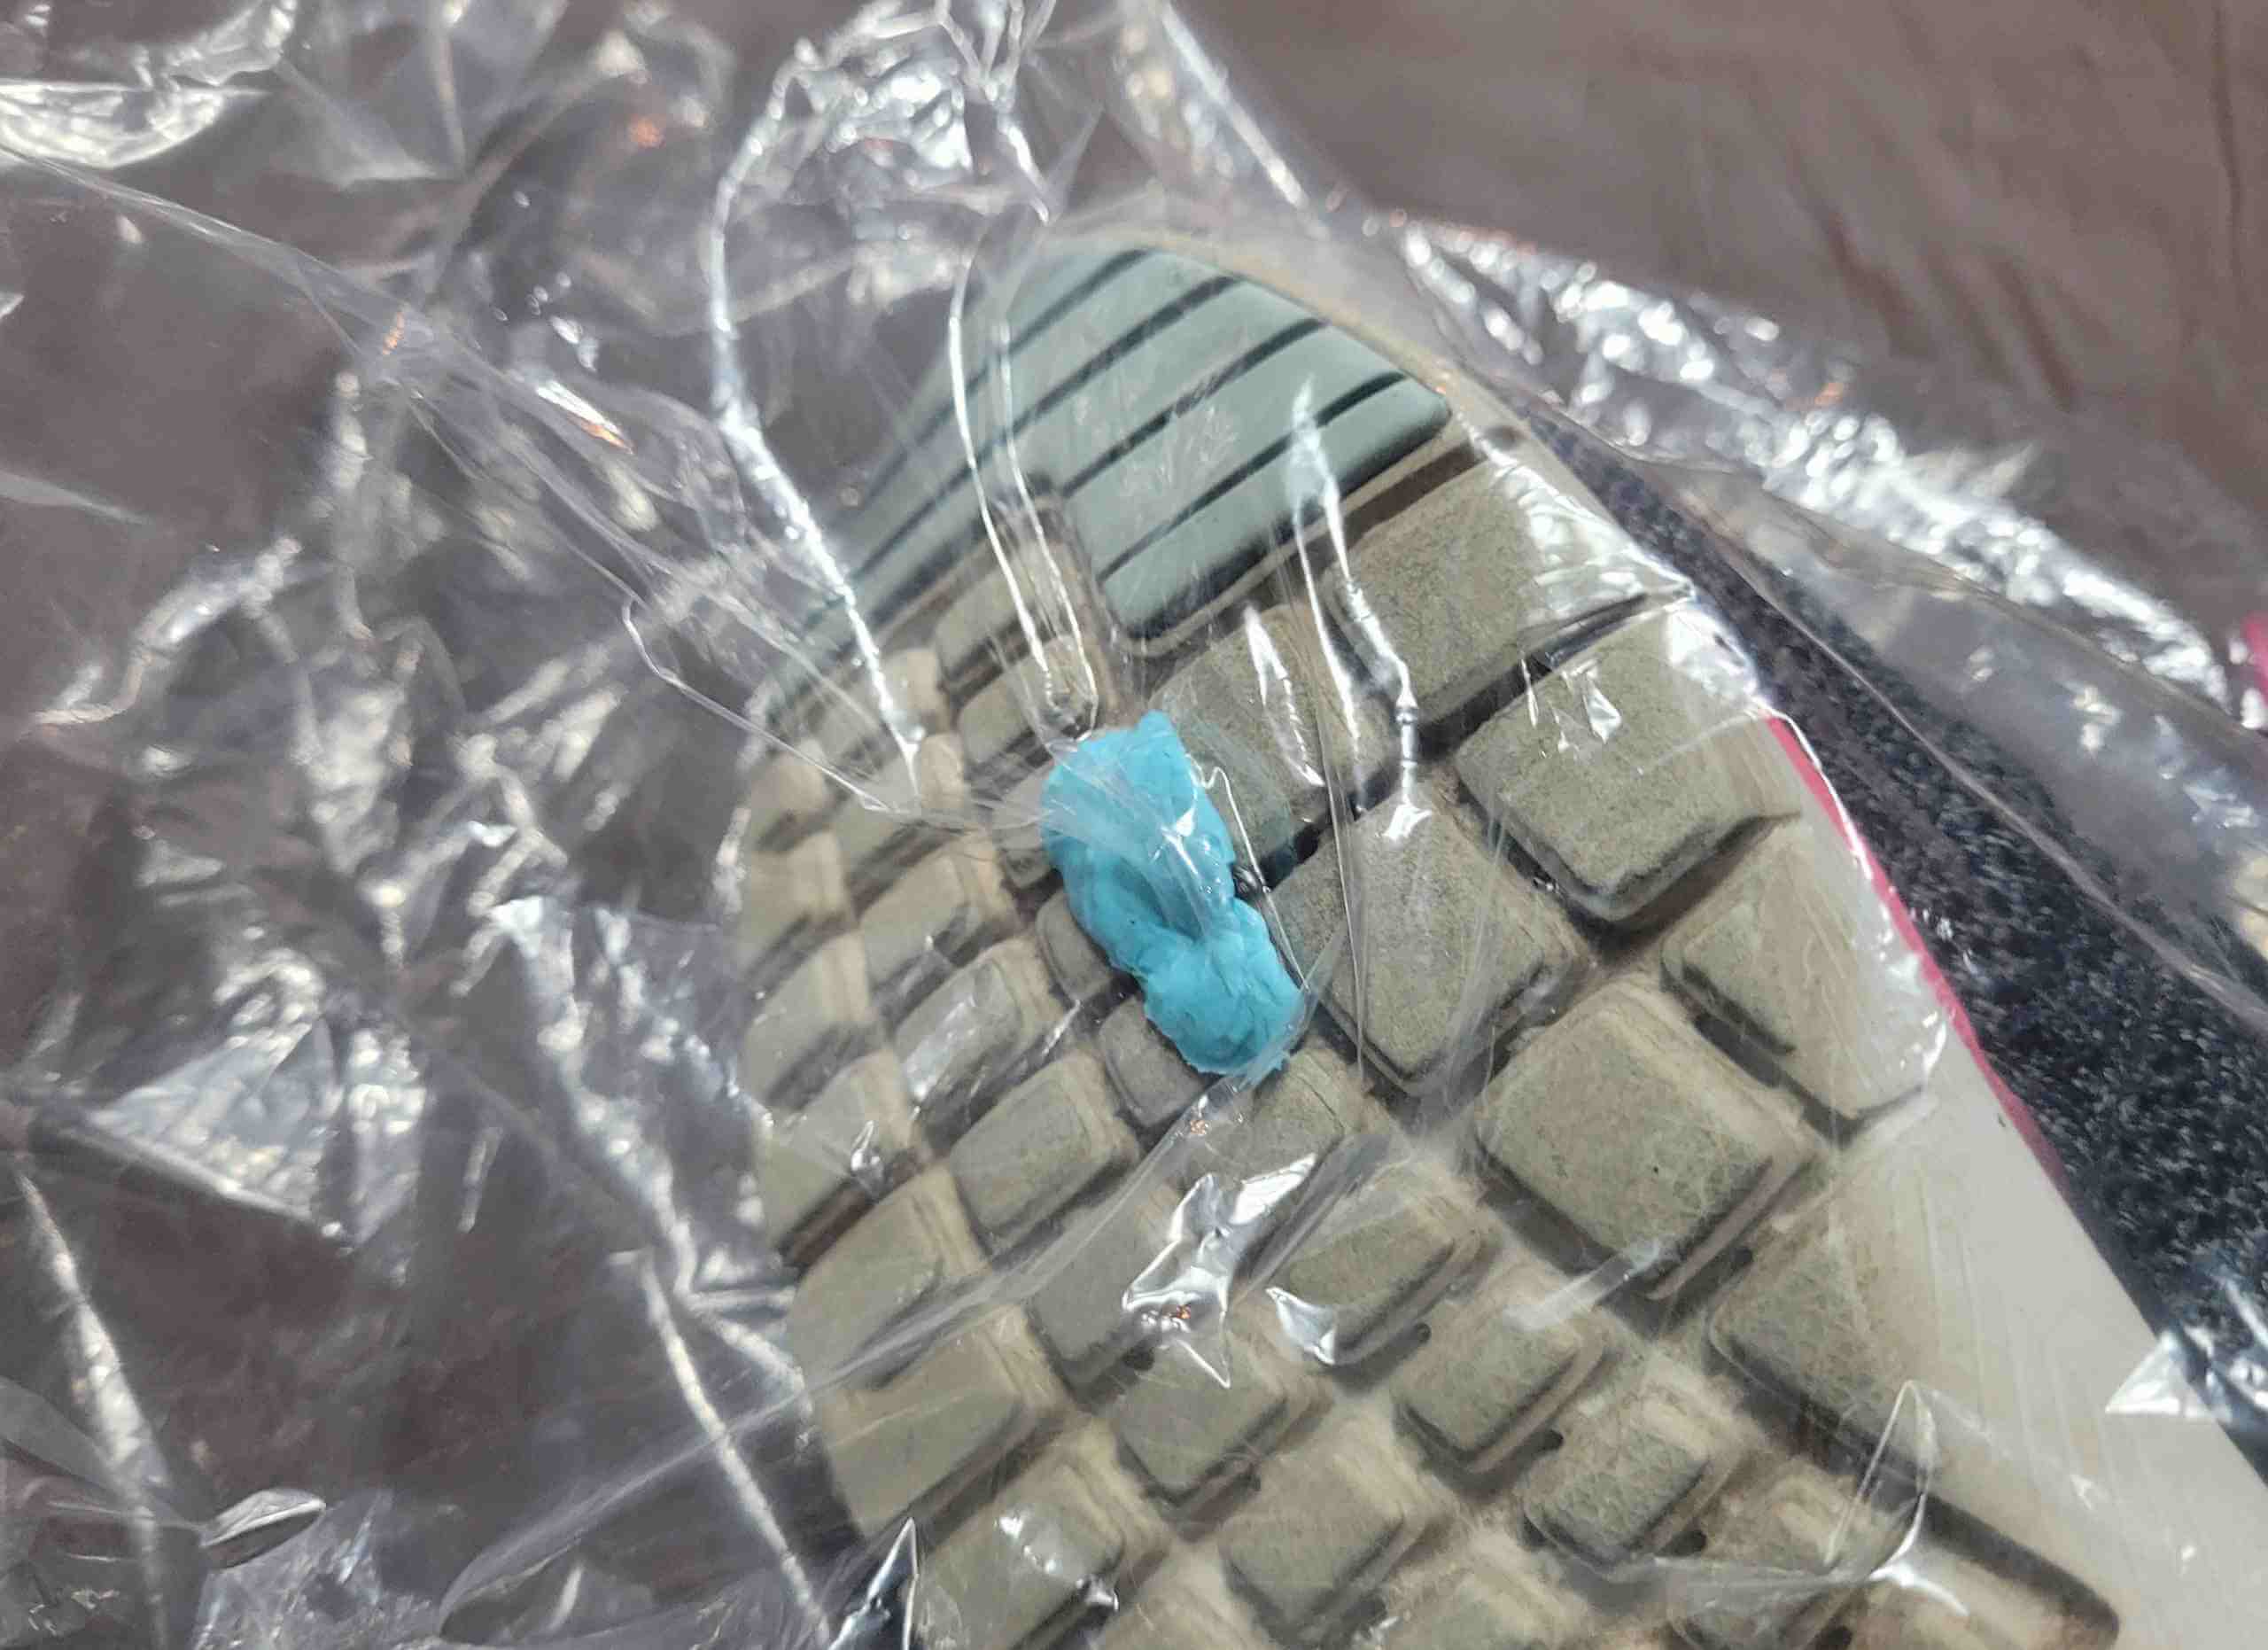 remove gum from shoe with freezer